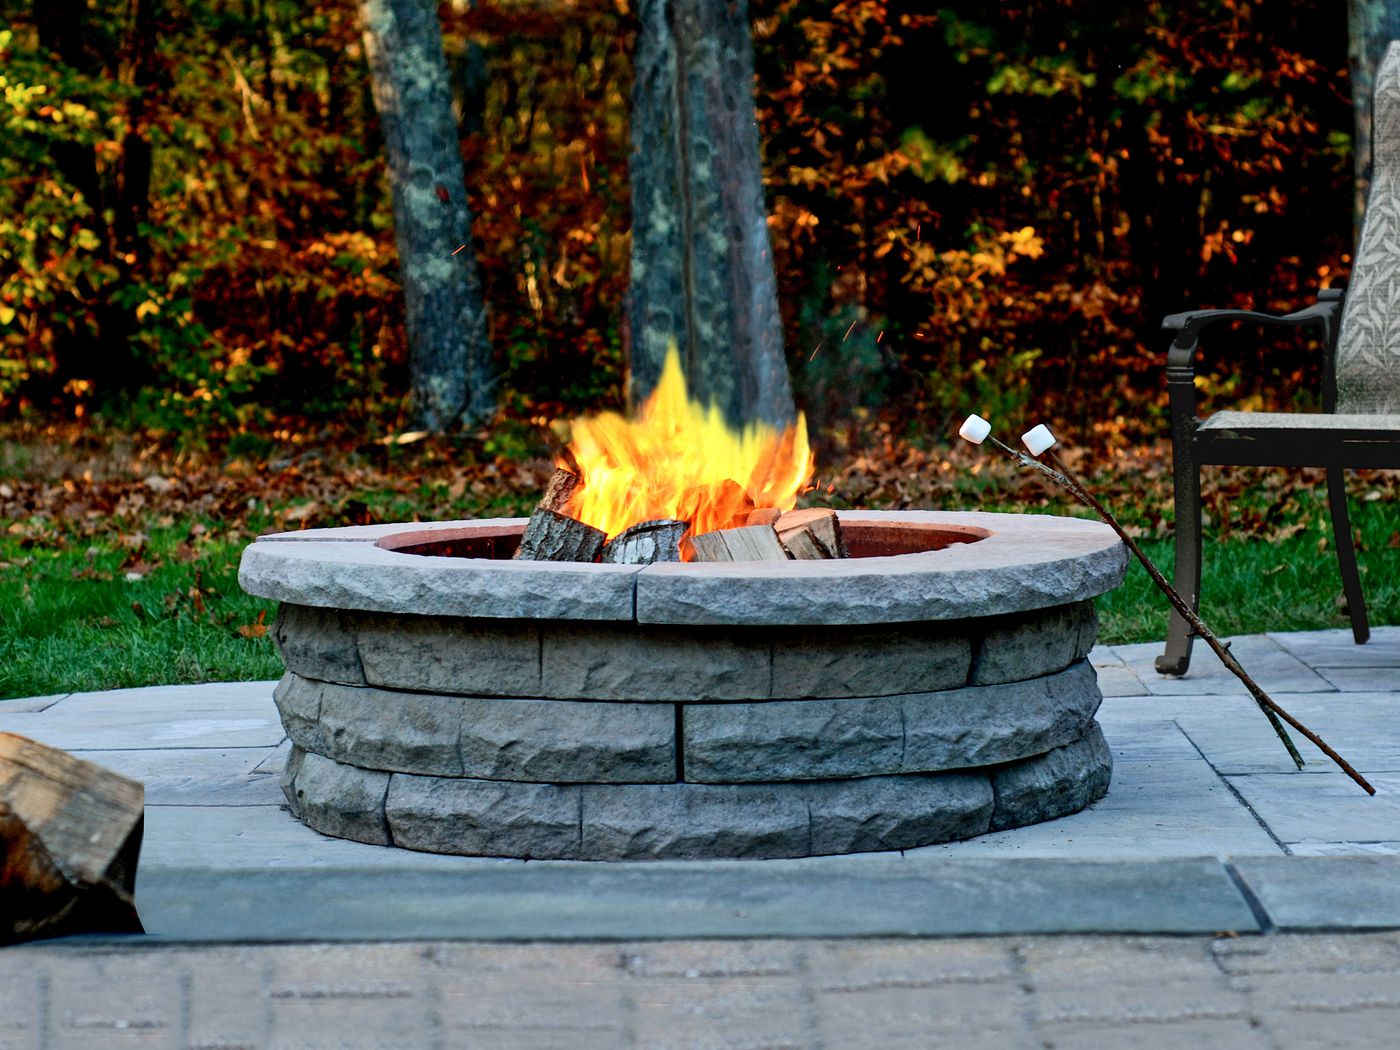 All About Fire Pits - This Old House